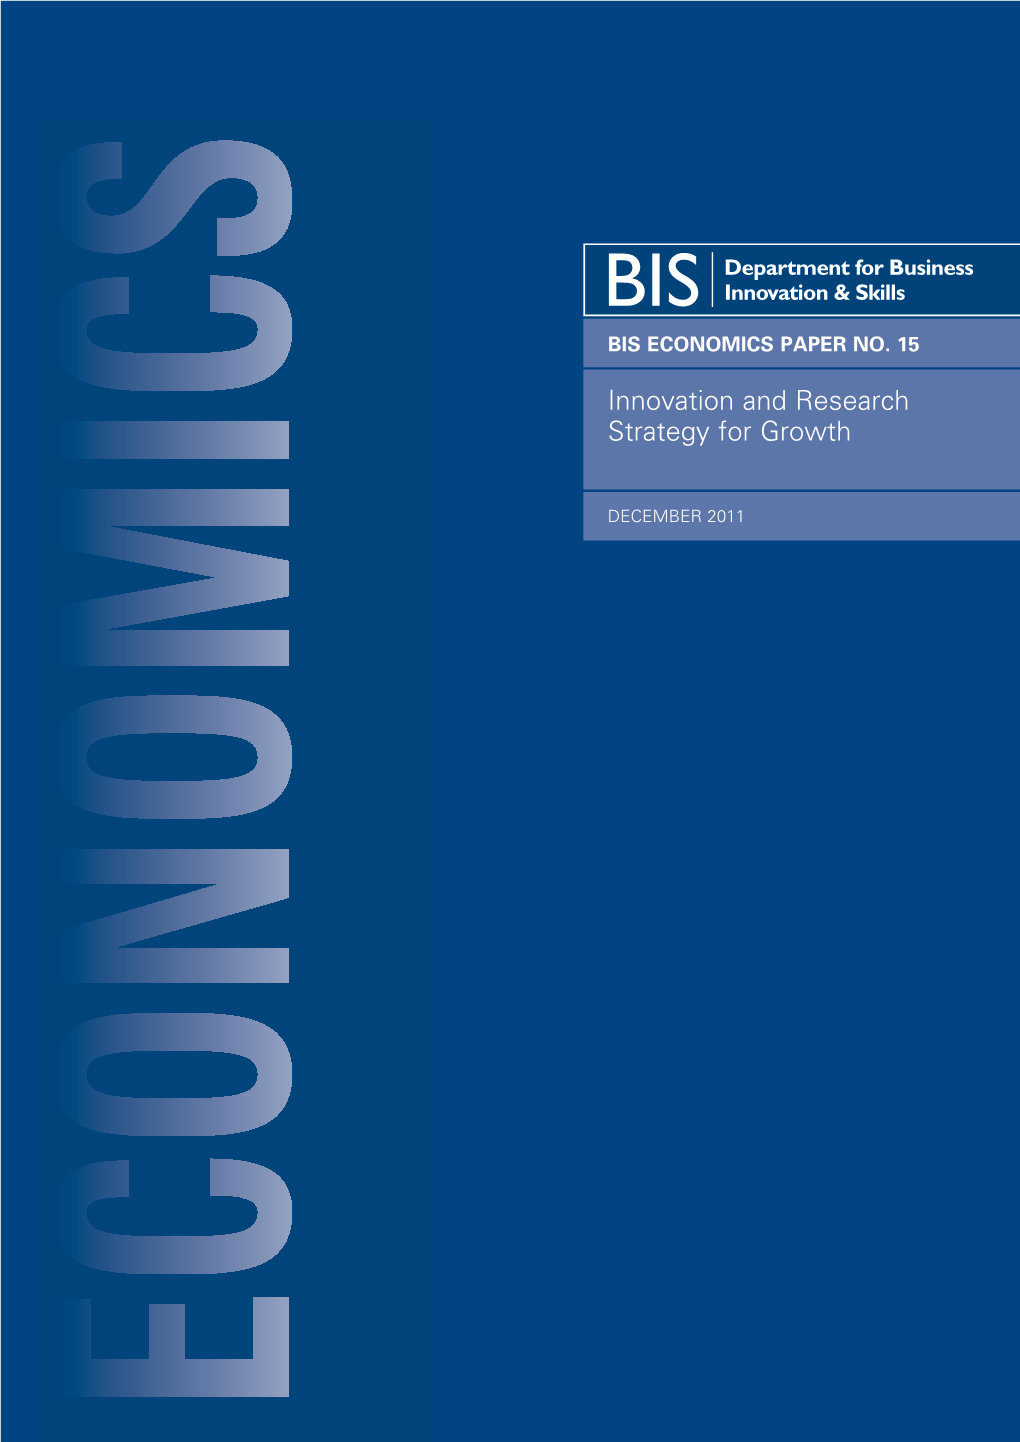 Economics Paper 15: Innovation and Research Strategy for Growth